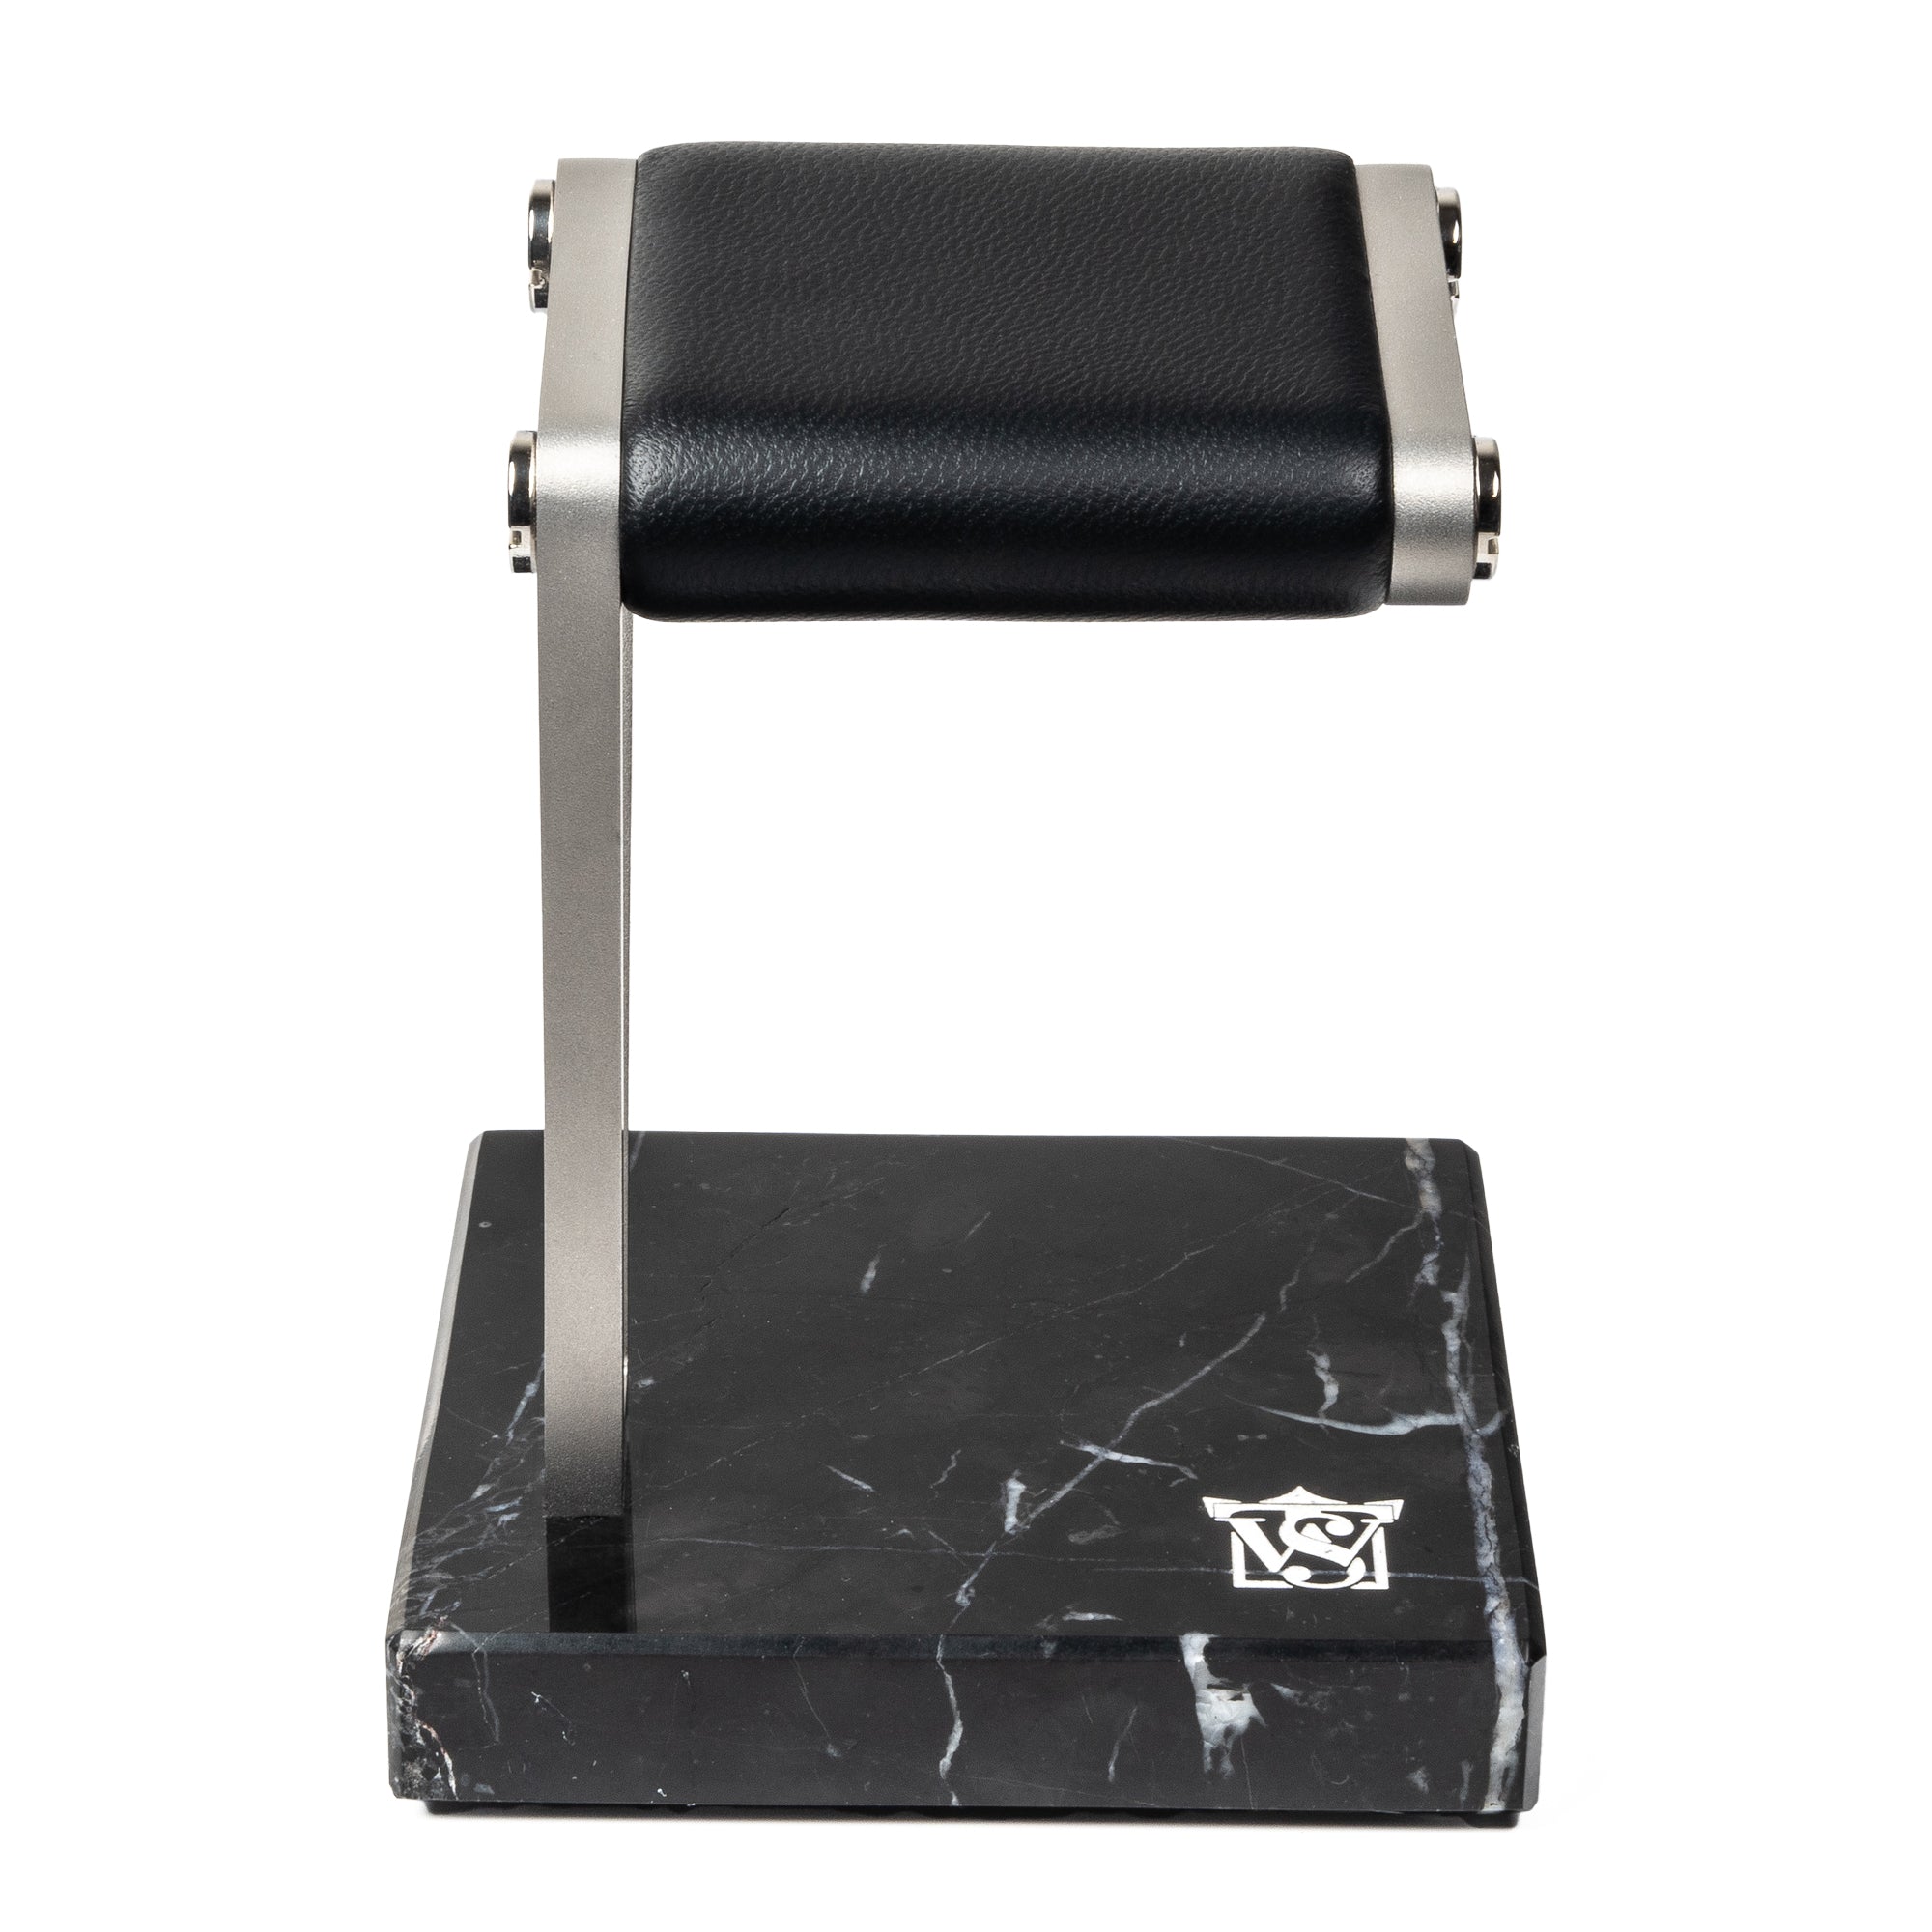 WATCH STAND 2.0 - SINGLE - BLACK & SILVER